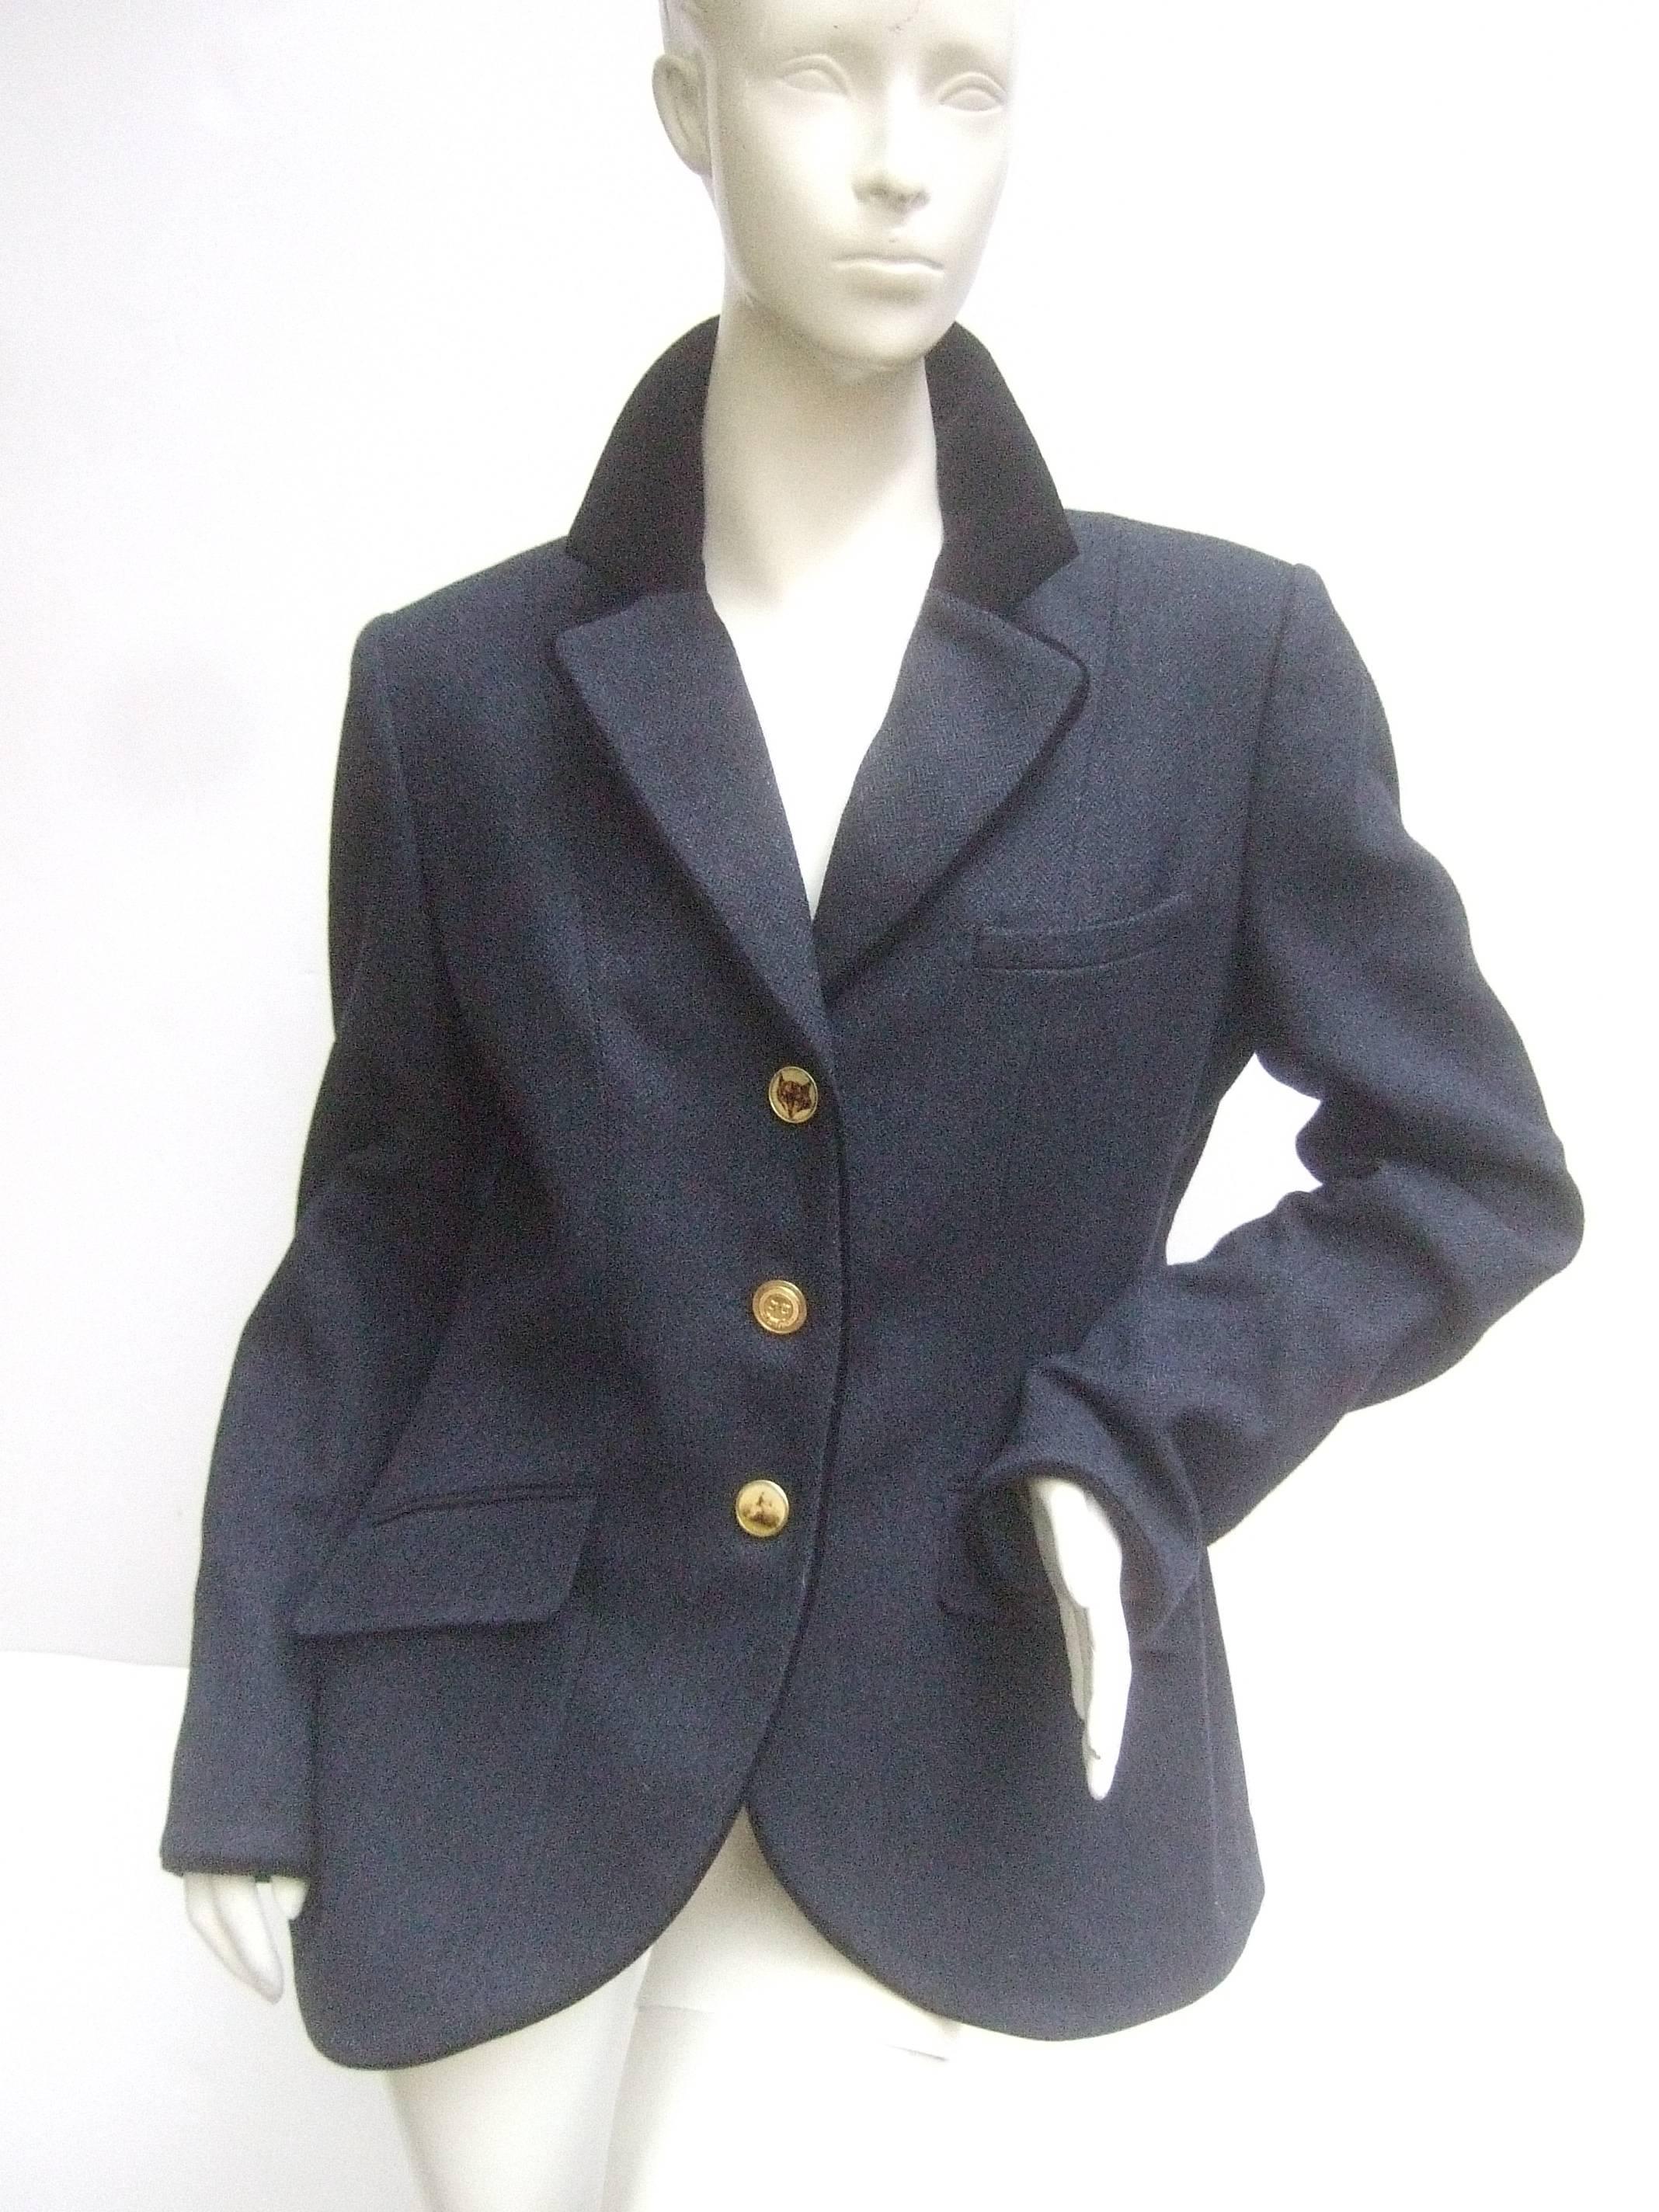 English style women's equestrian riding jacket 
The classic herringbone blue / gray wool jacket 
is designed with a black velvet collar & piping trim 

The unique trio set of buttons depict a fox, horse 
jumper & a gilt metal insignia